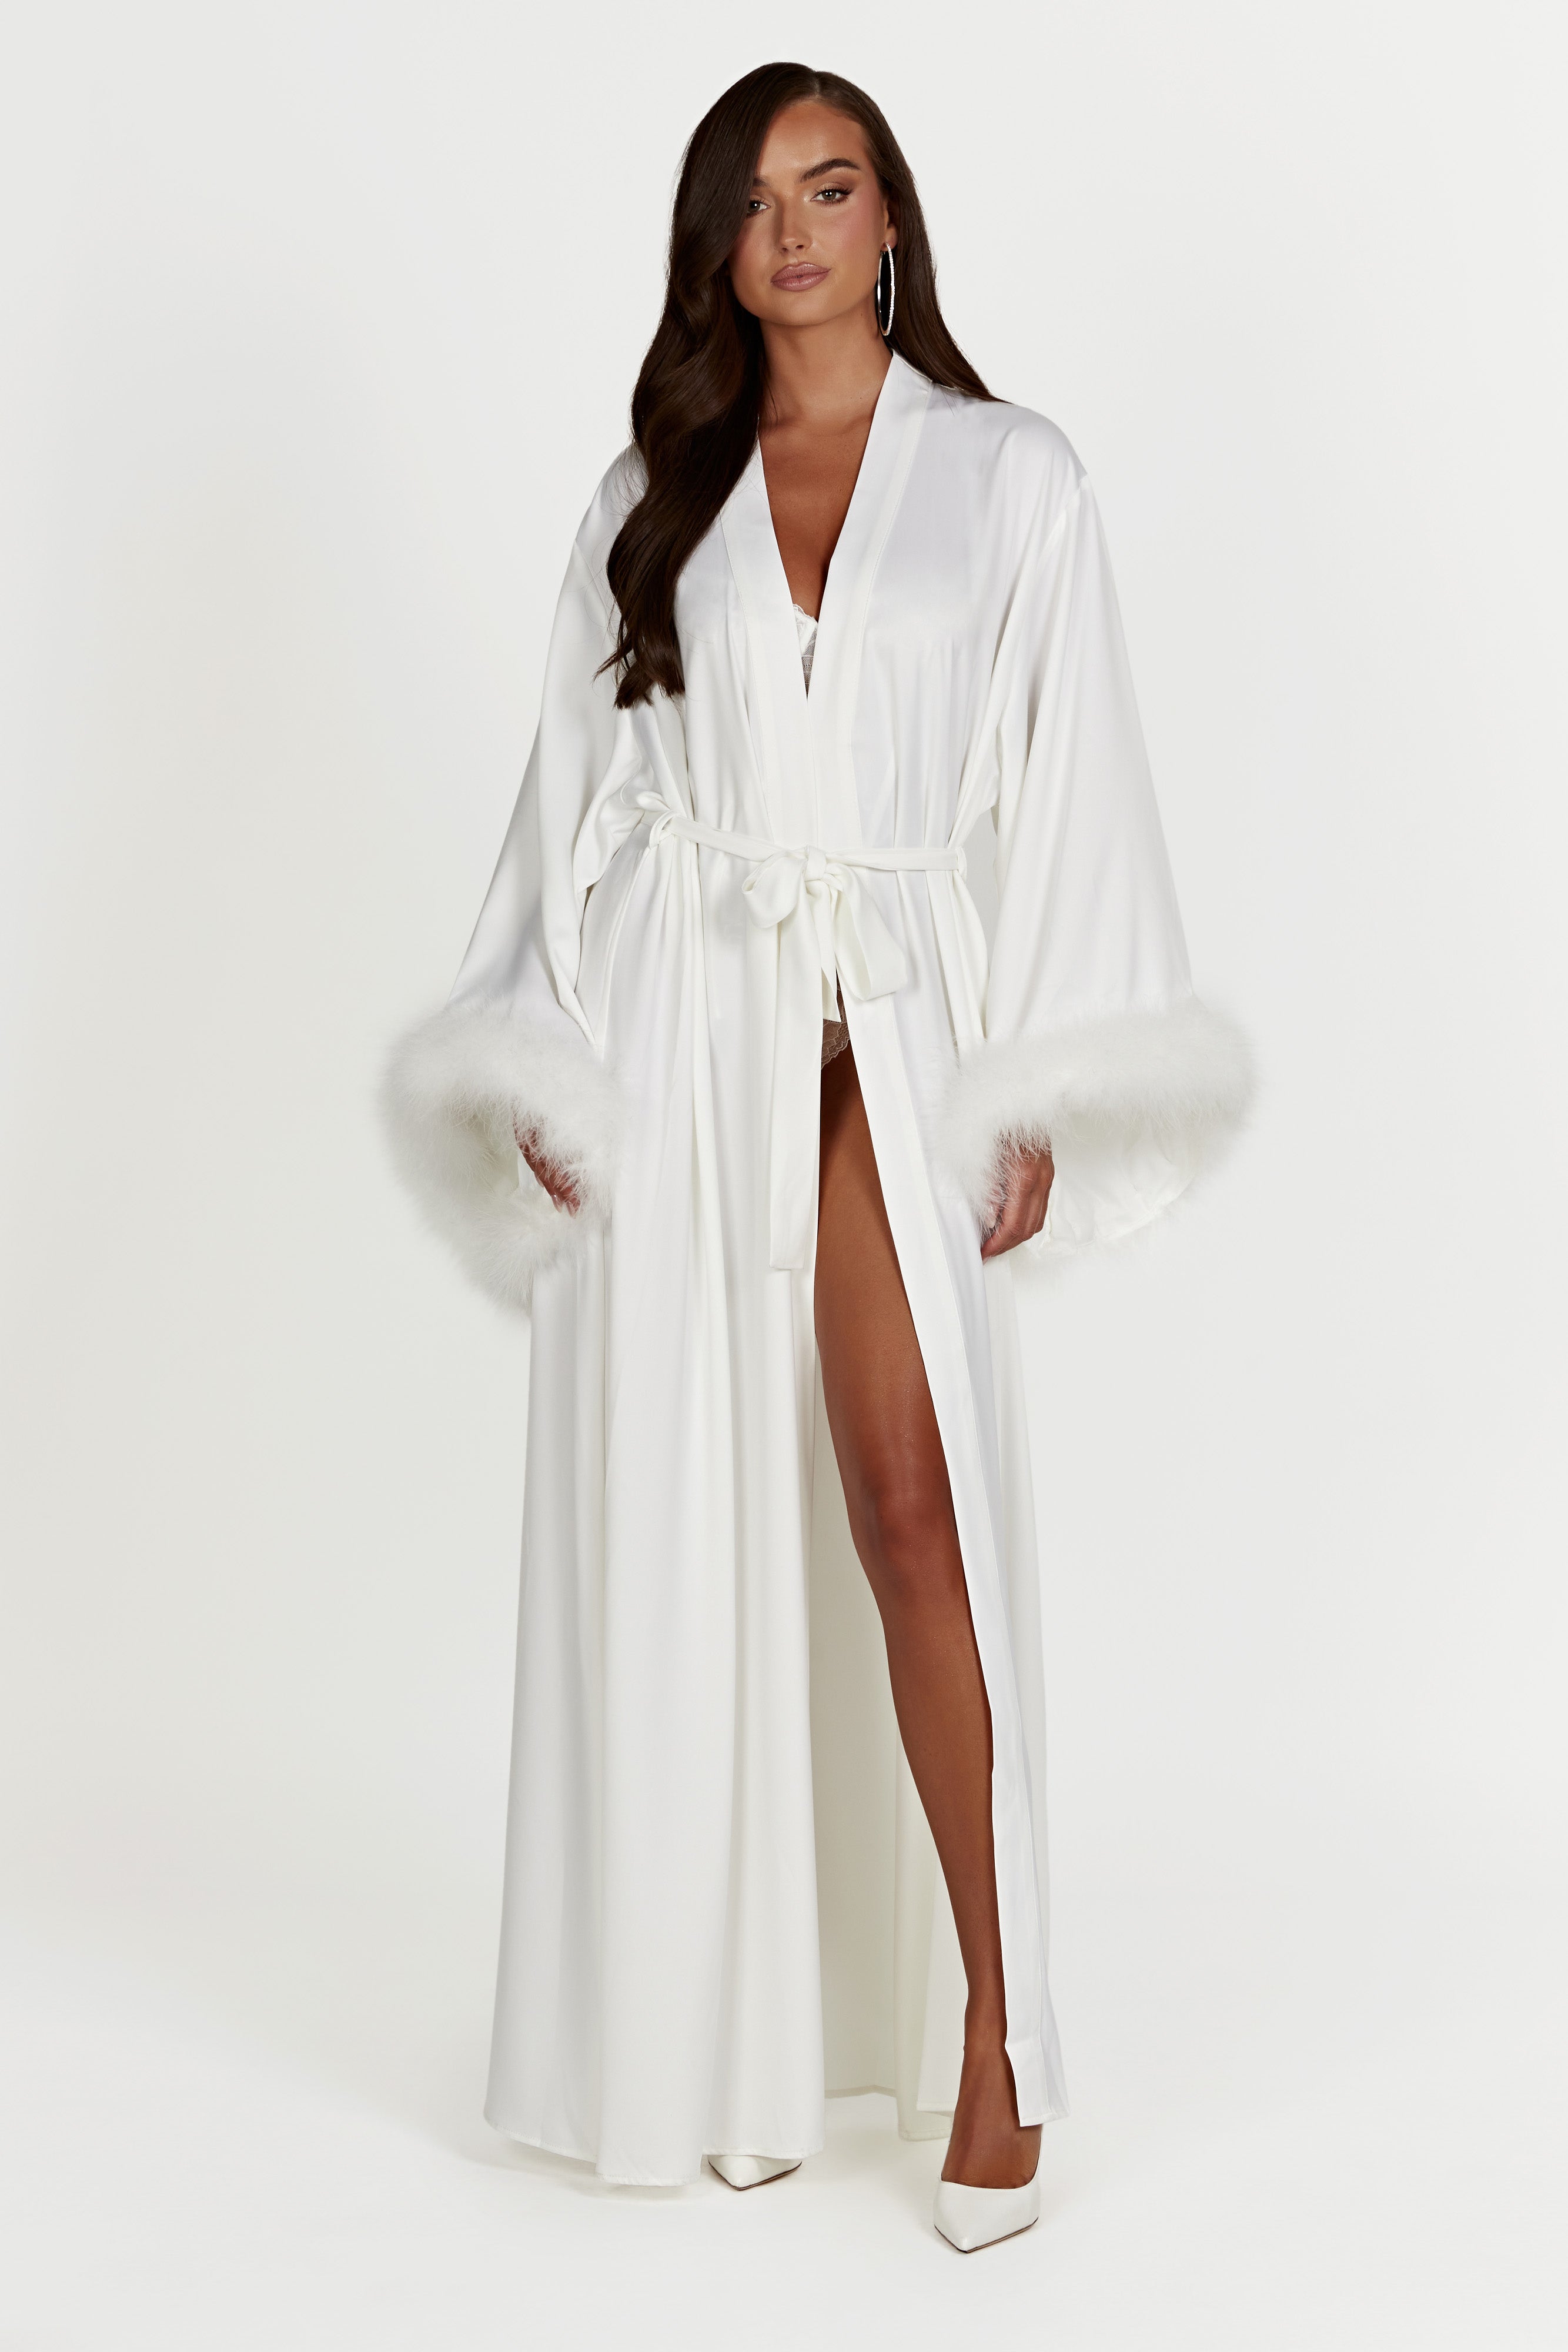 Le Laurier Bridal Women's Silk Robe - Short Ostrich Feather Trim Hem and  Sleeve Collection | CoolSprings Galleria